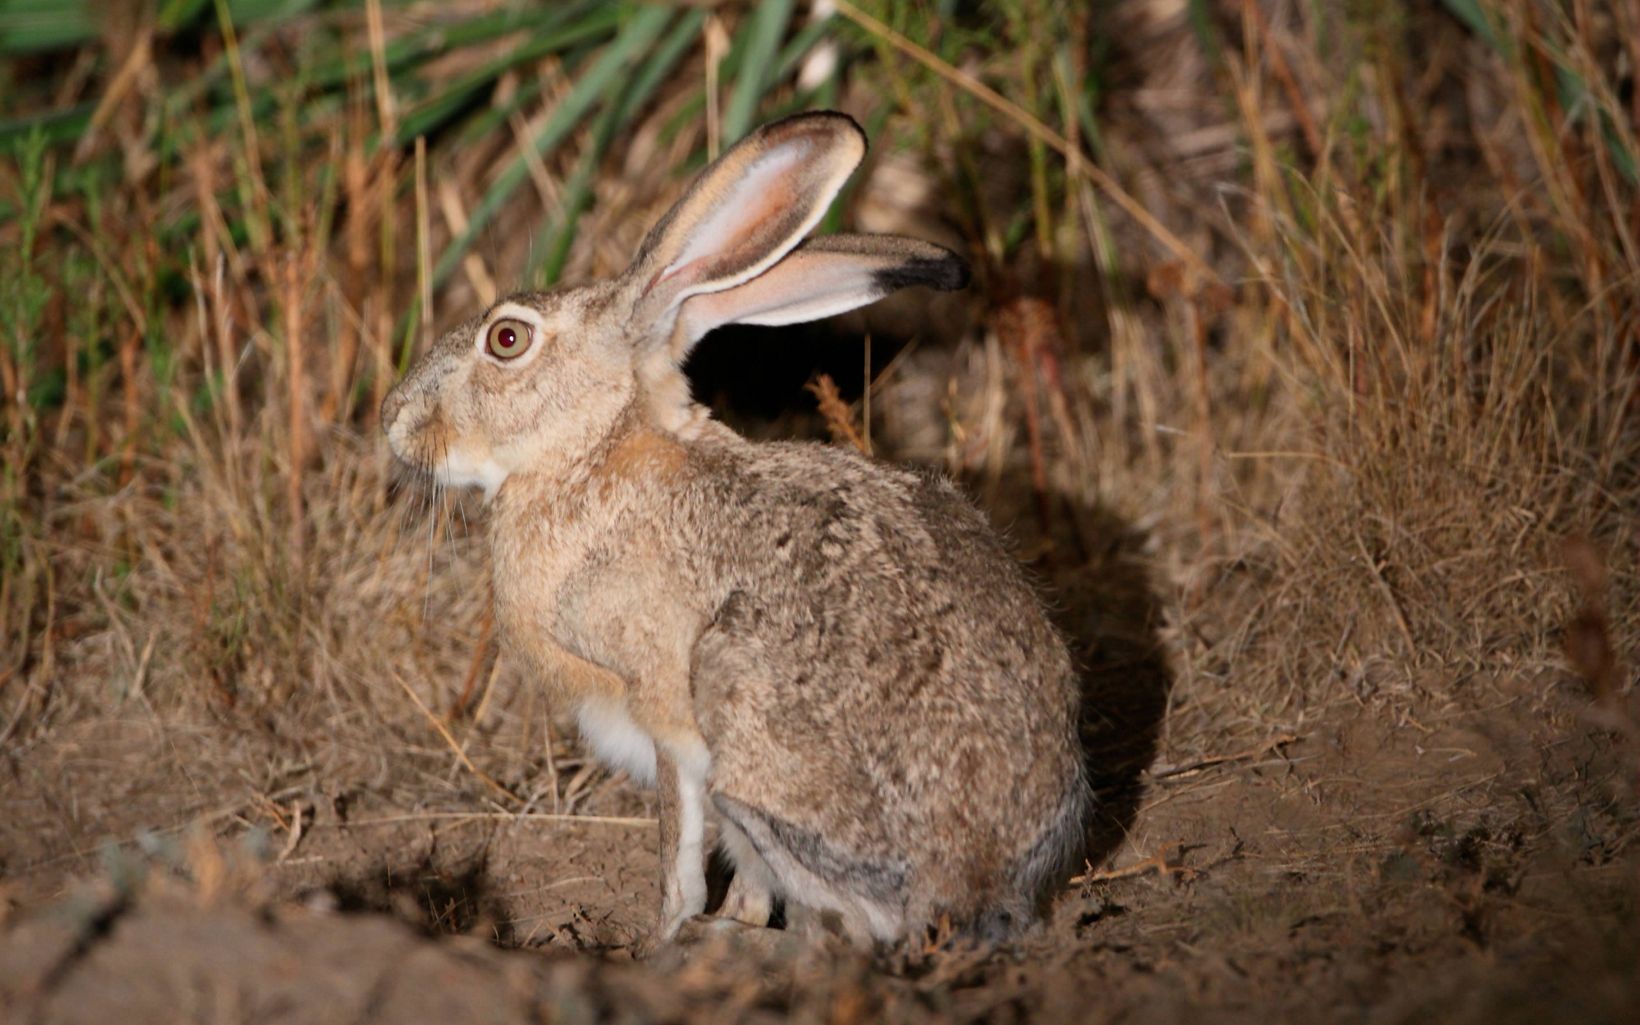 Light brown rabbit with long ears that stick up.